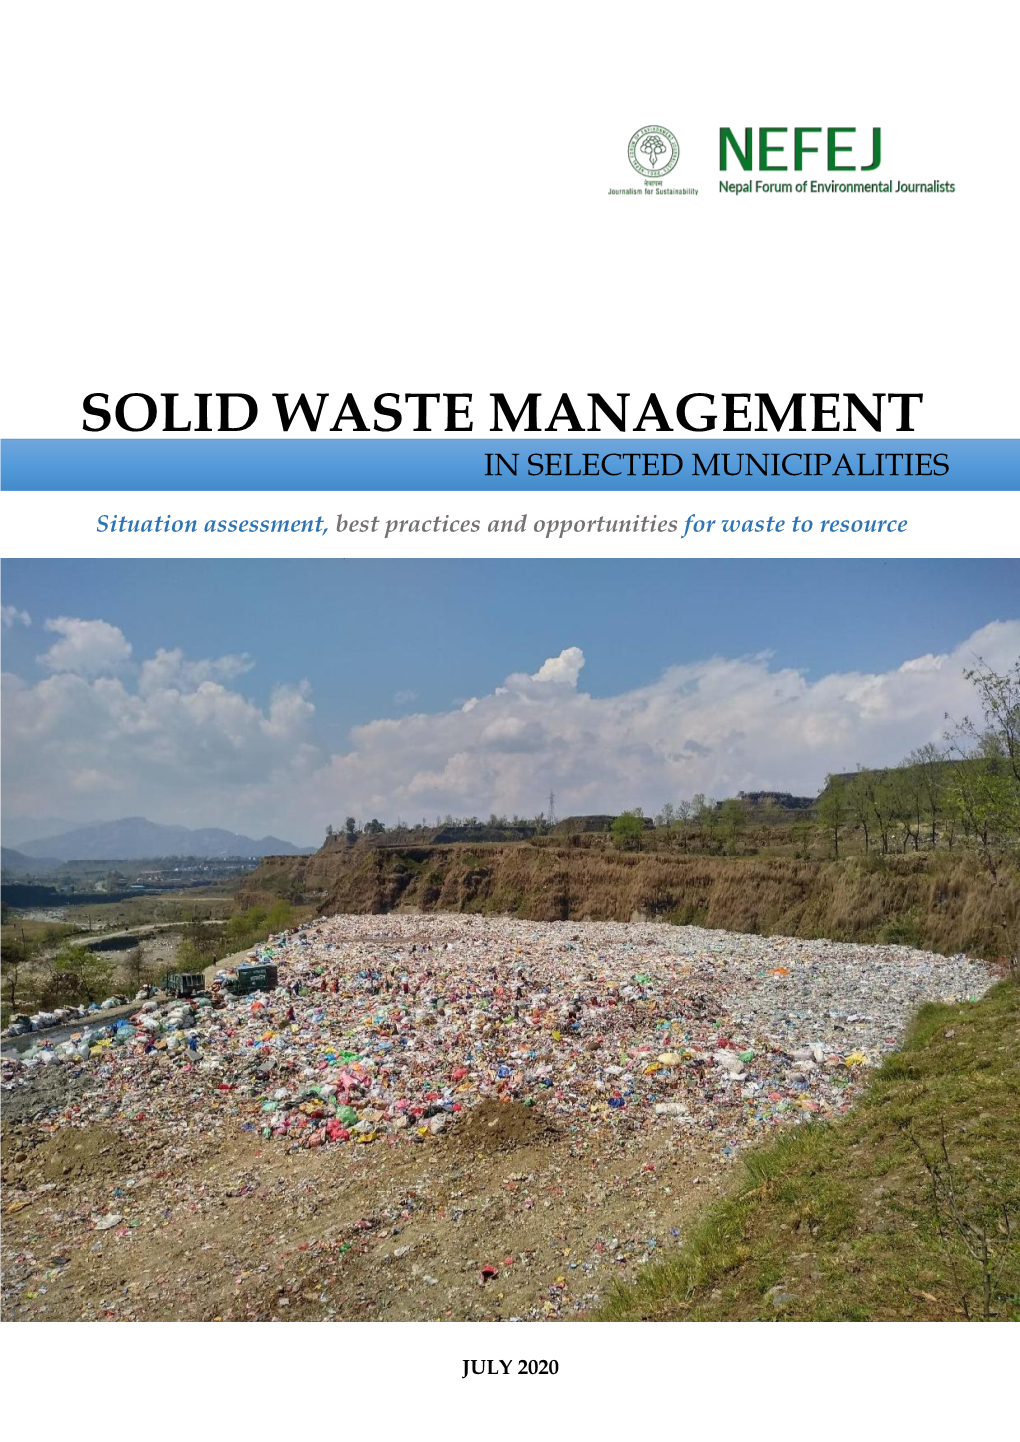 Solid Waste Management in Selected Municipalities